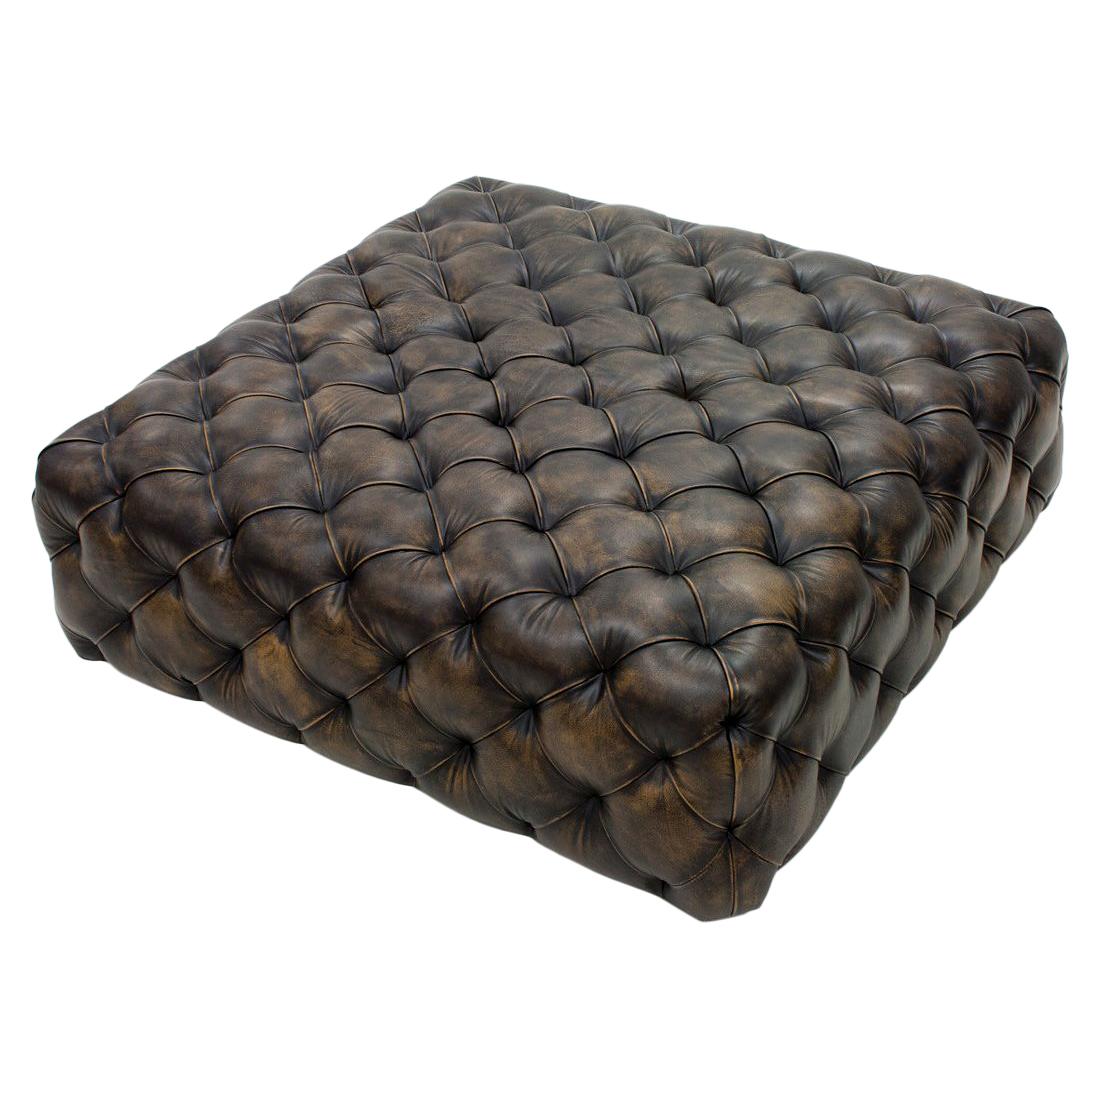 Browny Leather Ottoman Not Button